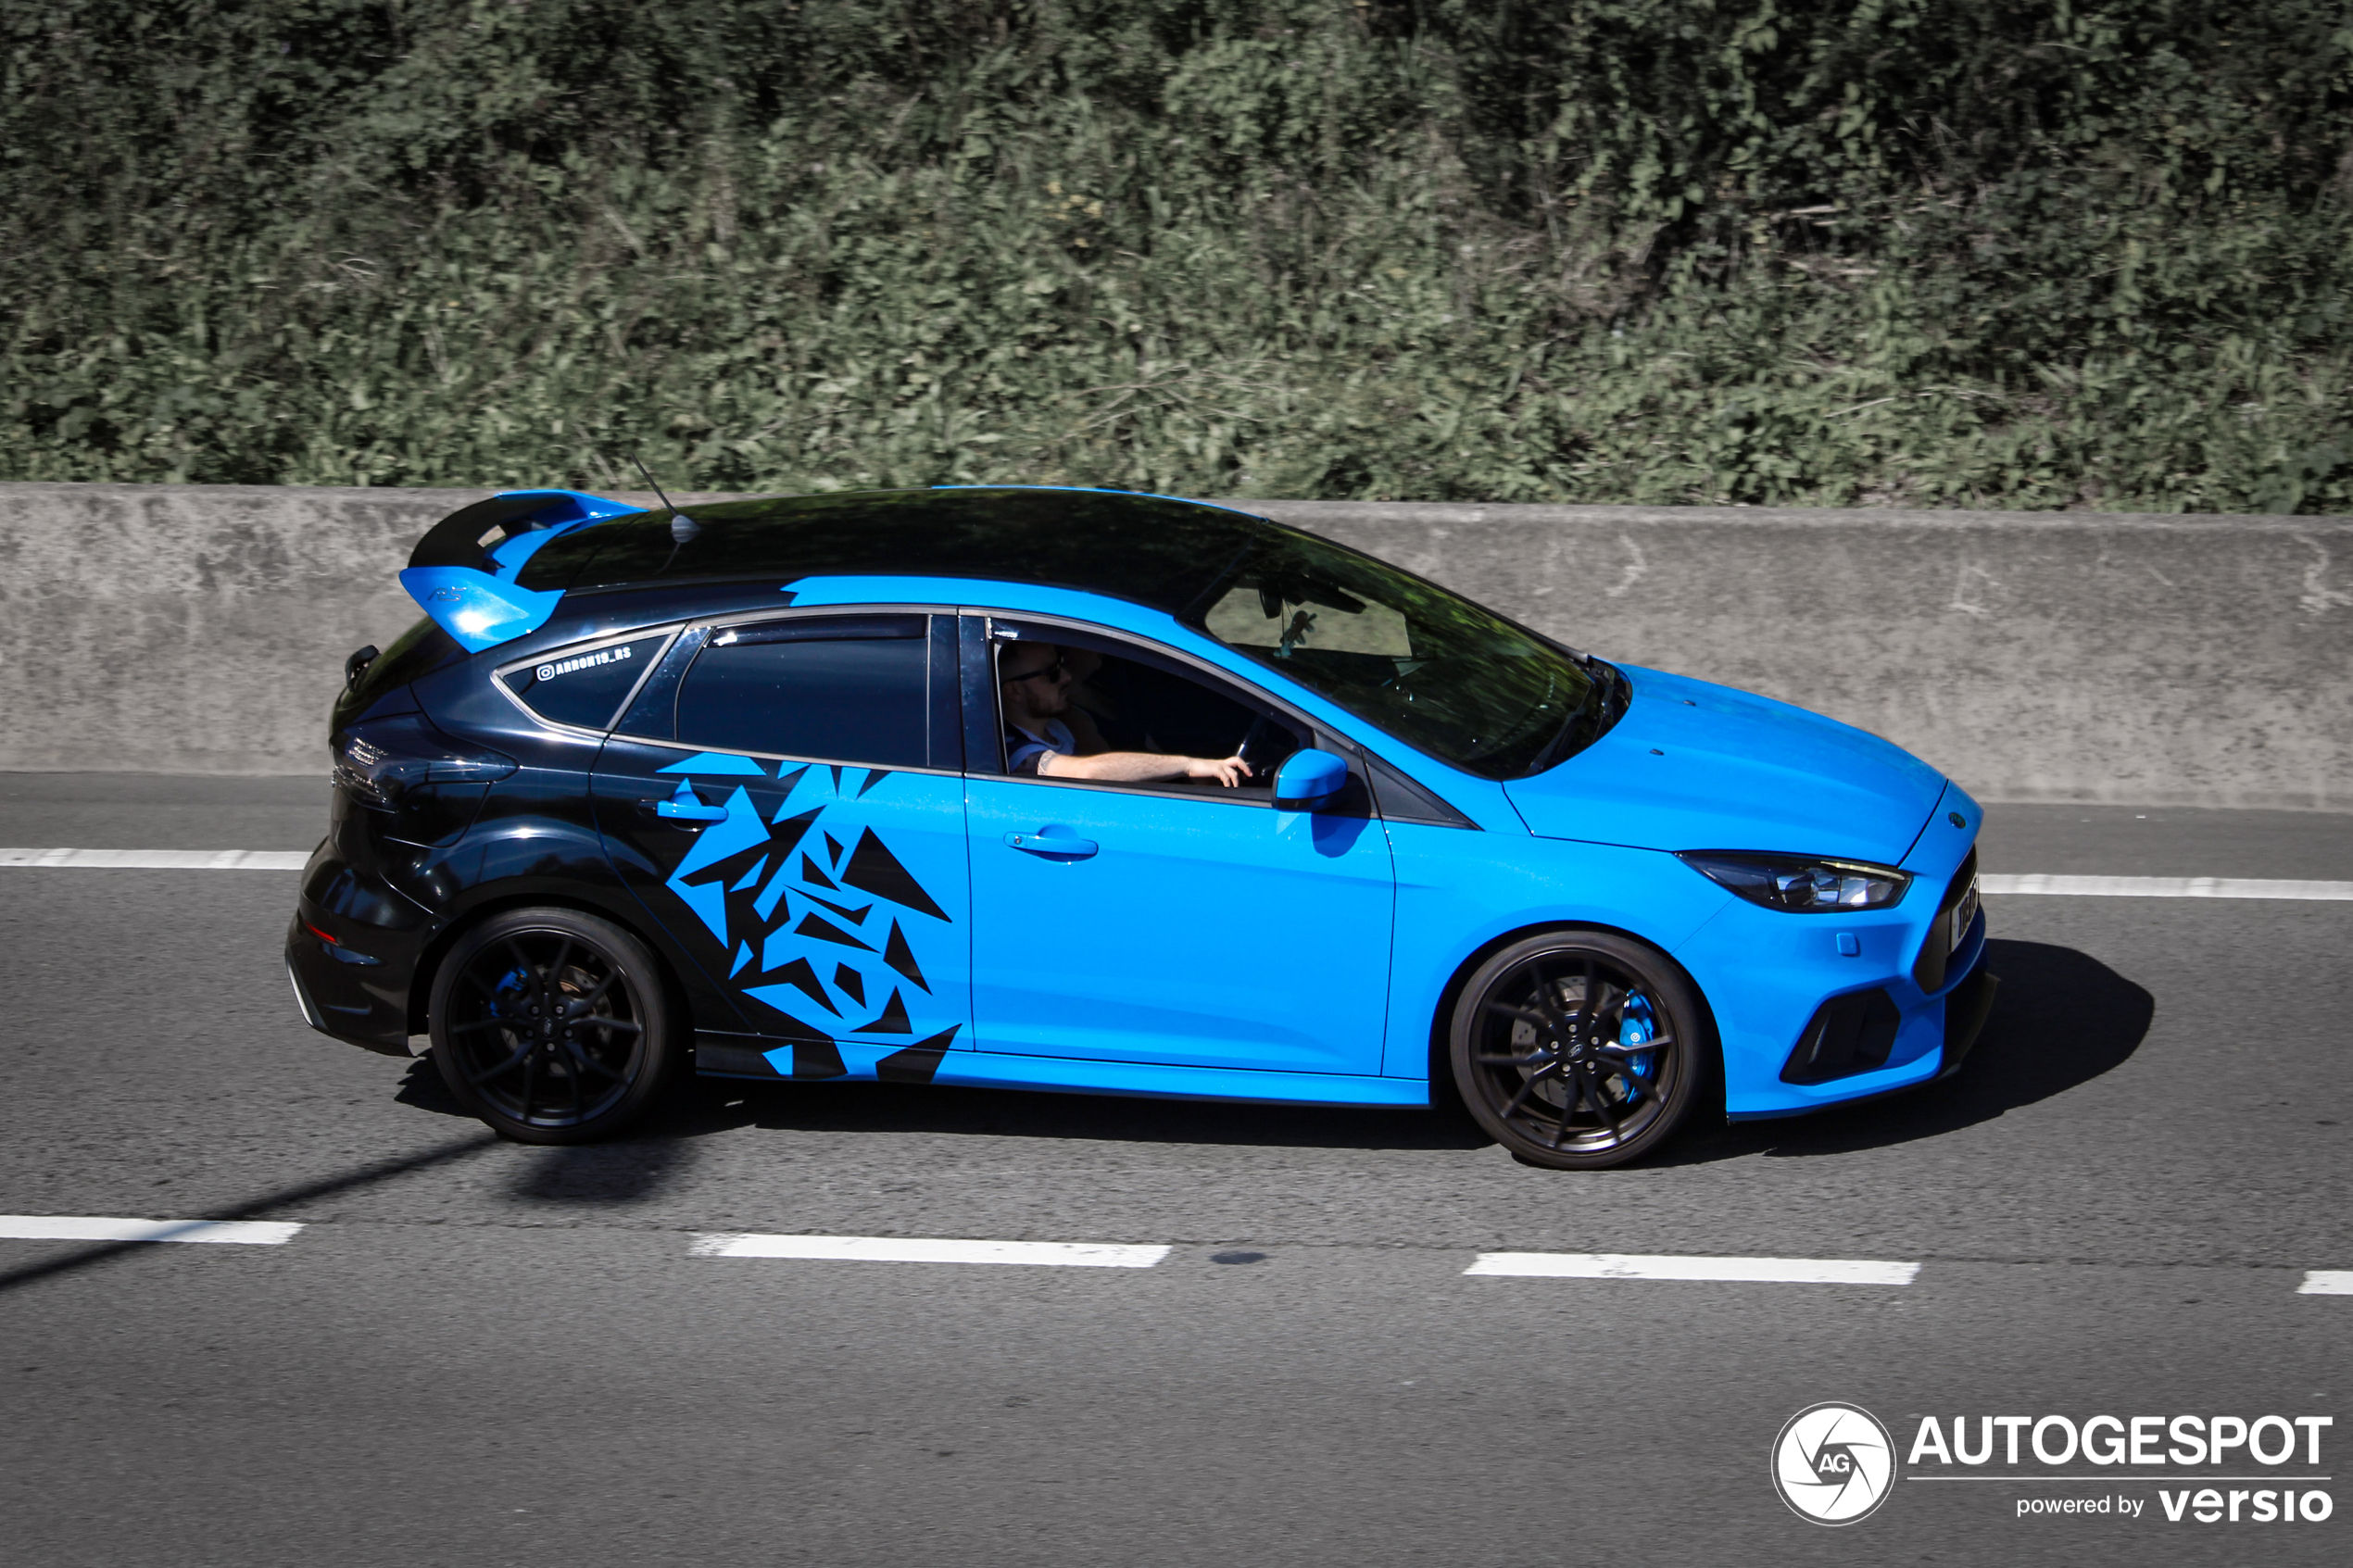 Ford Focus RS 2015 Sabre Tuning